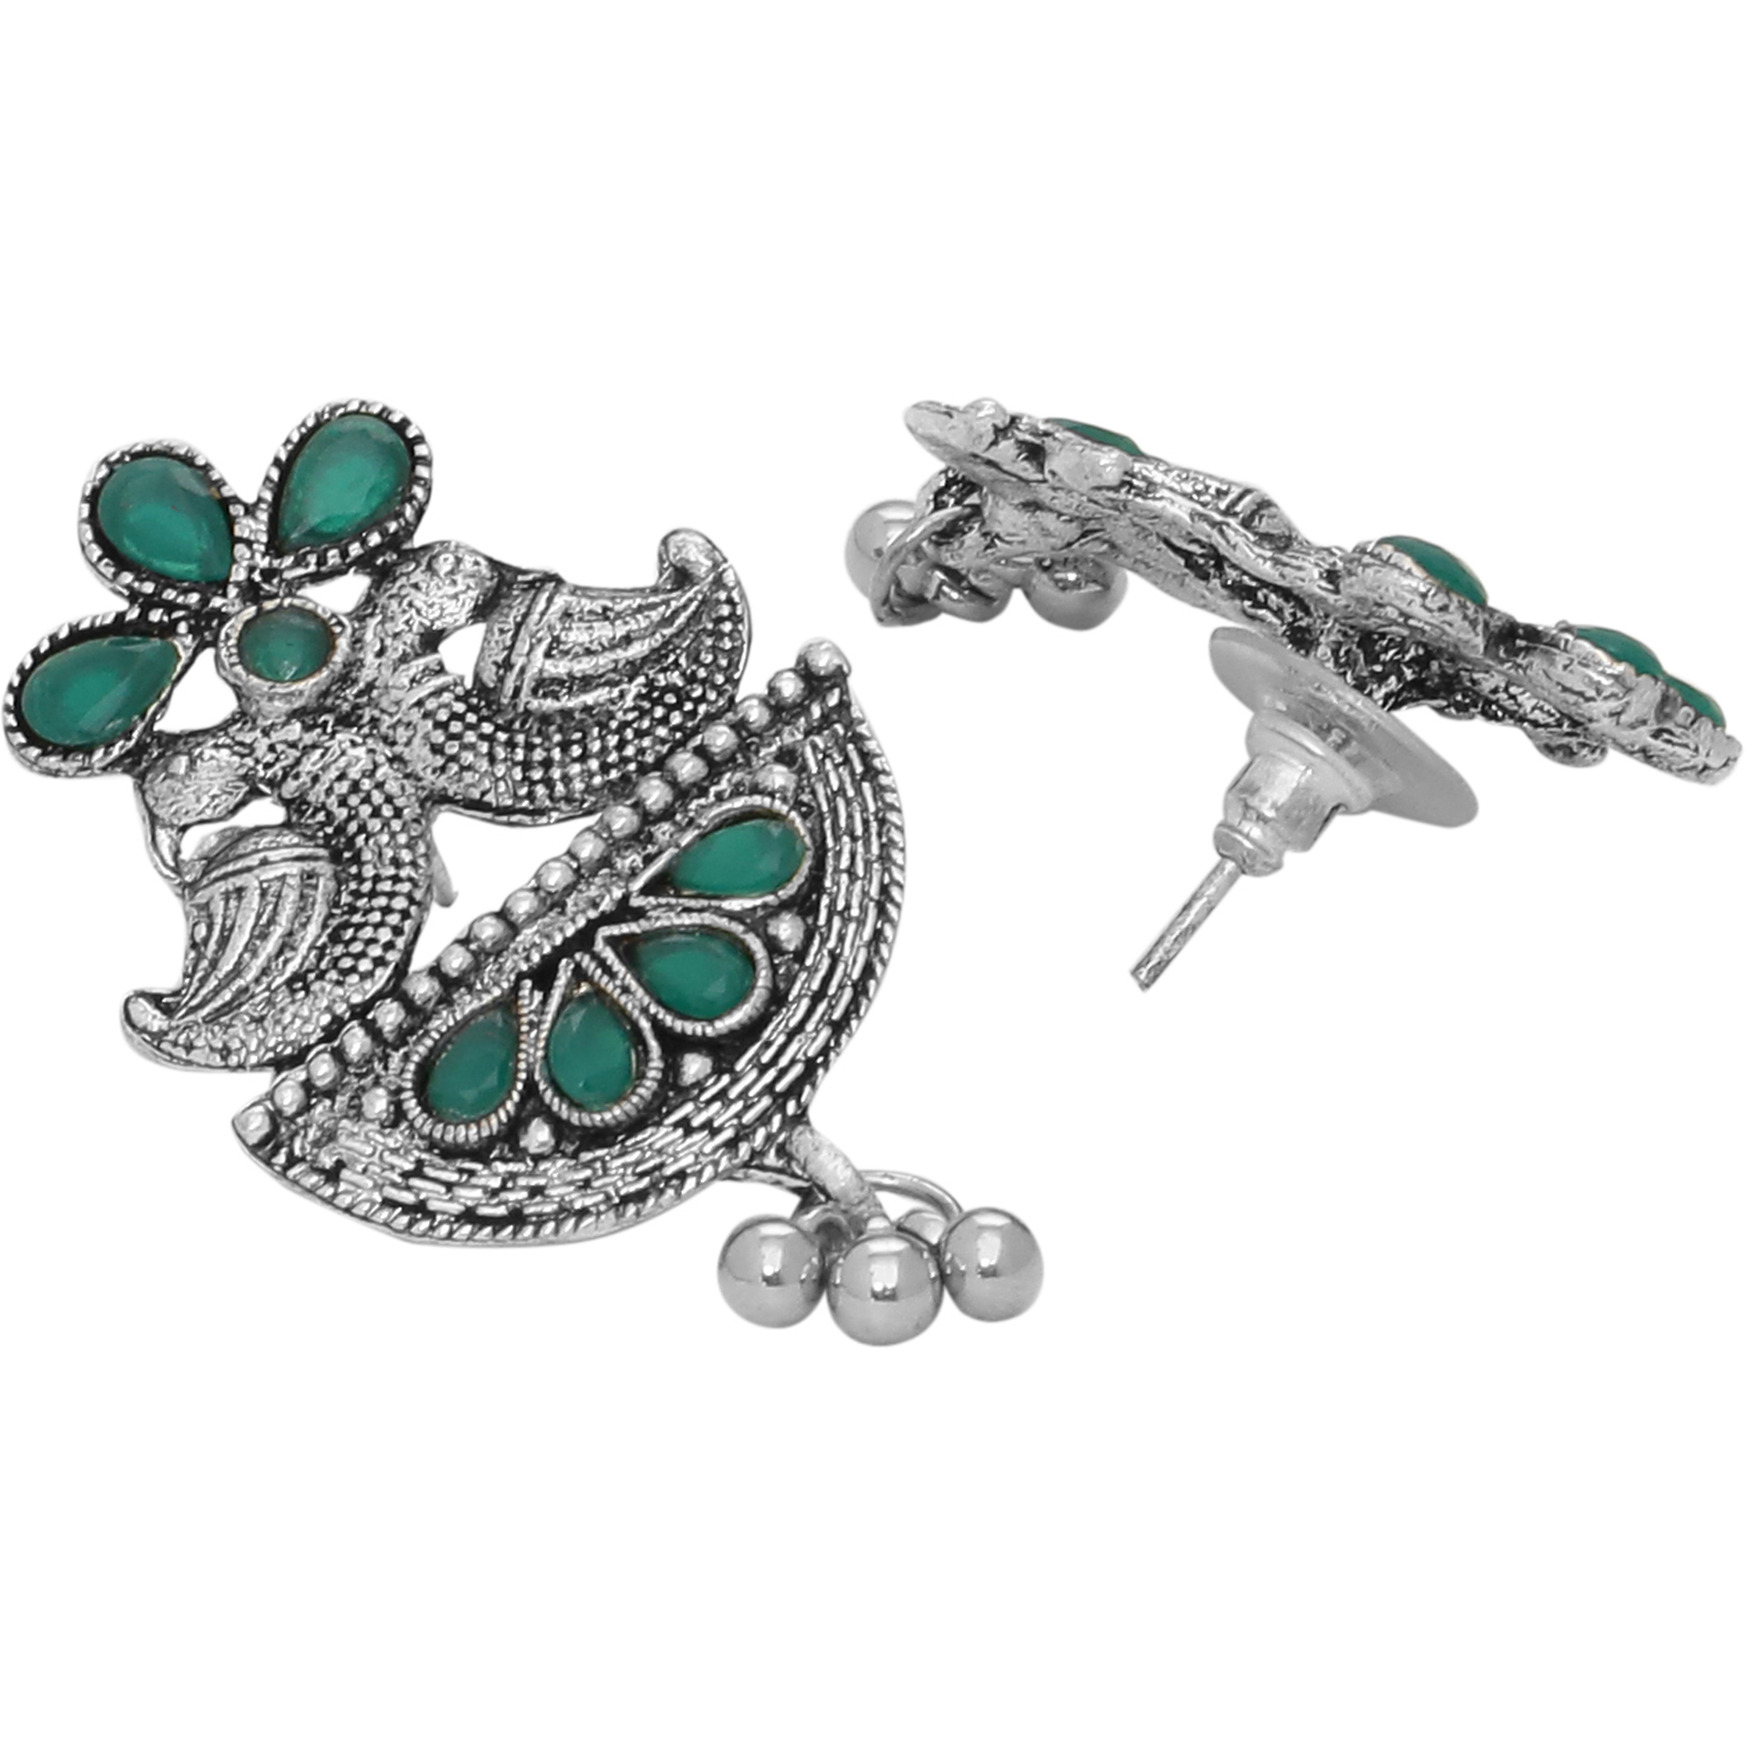 Classic & Green Turquoise & Silver Detailing Floral Design Studs Earrings By Silvermerc Designs